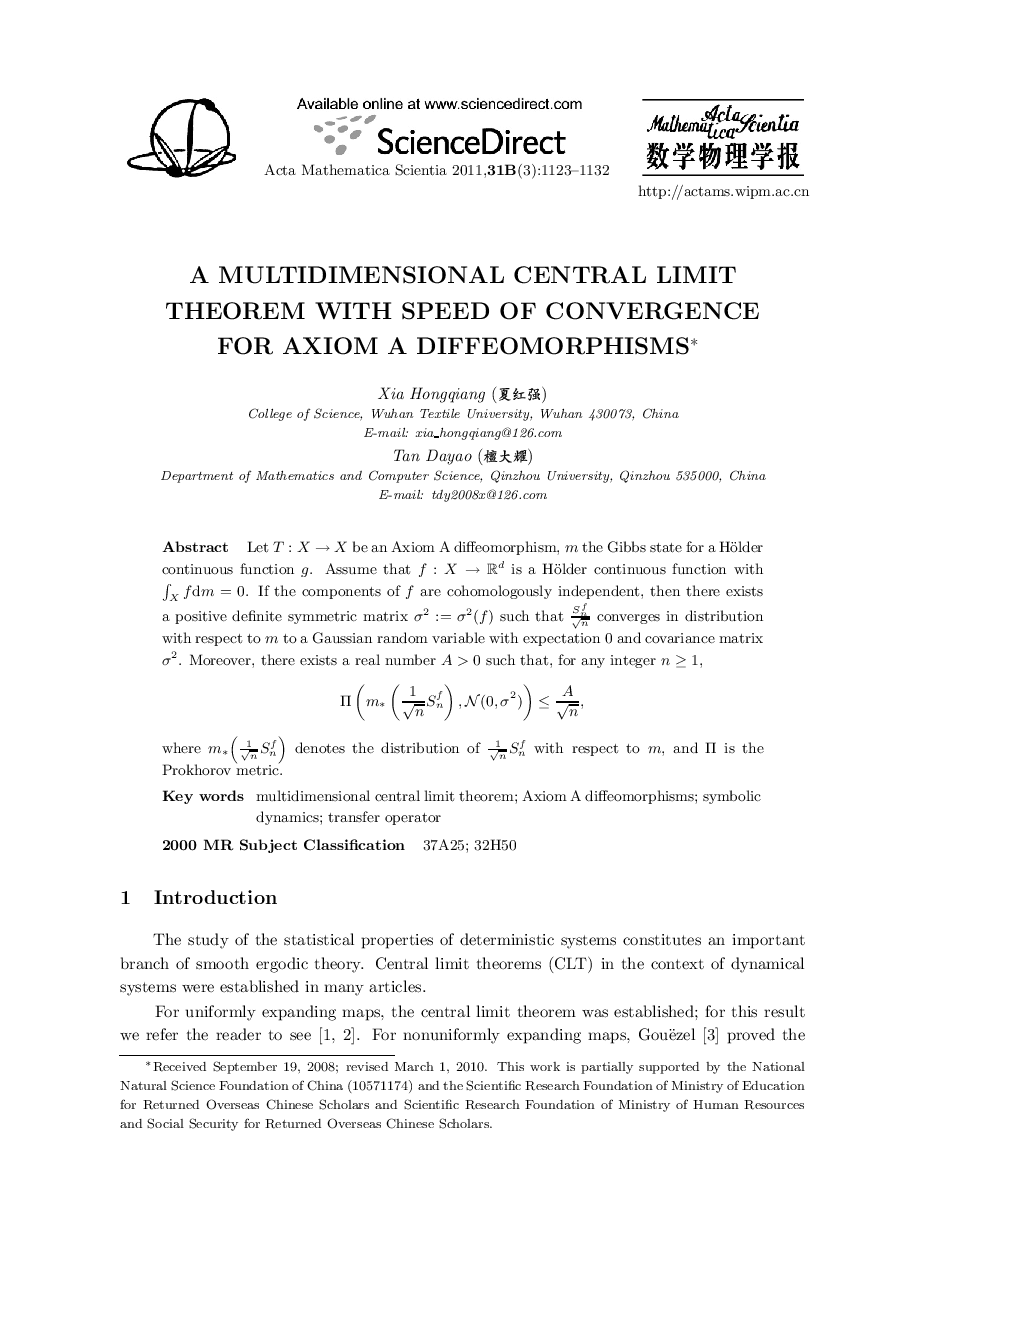 A multidimensional central limit theorem with speed of convergence for axiom a diffeomorphisms 